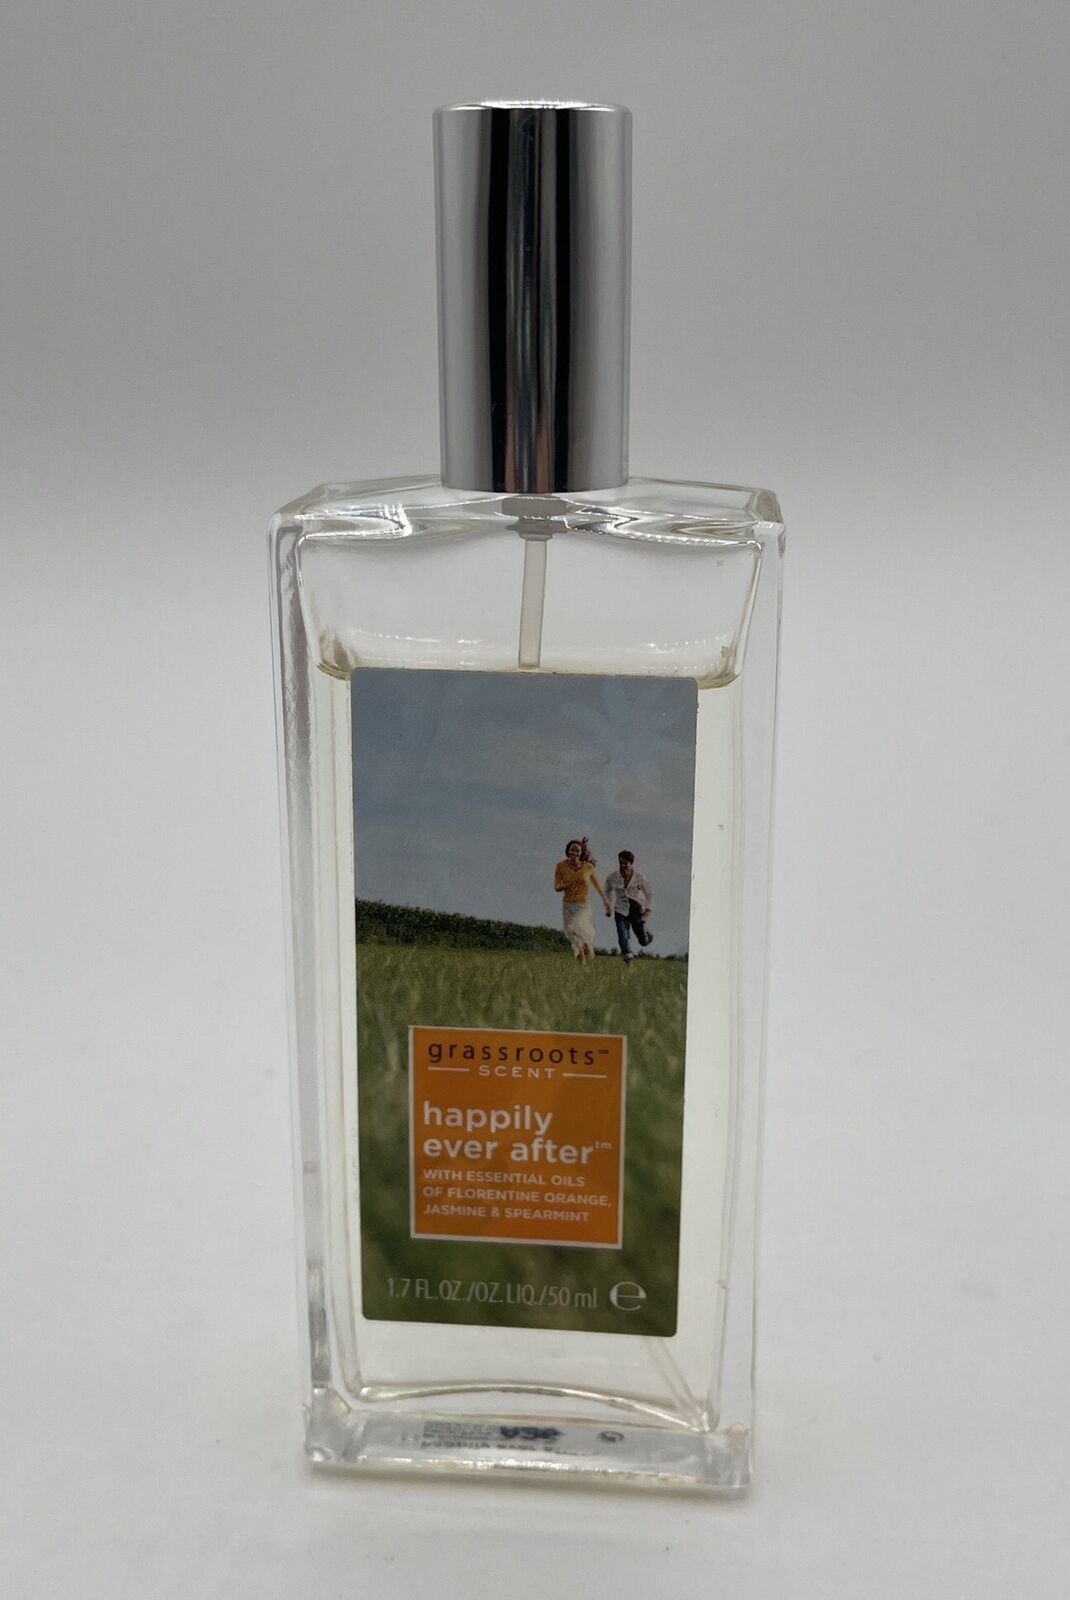 Grassroots “Happily Ever After” Unisex Perfume Oil Spray 1.7 fl. oz RARE HTF